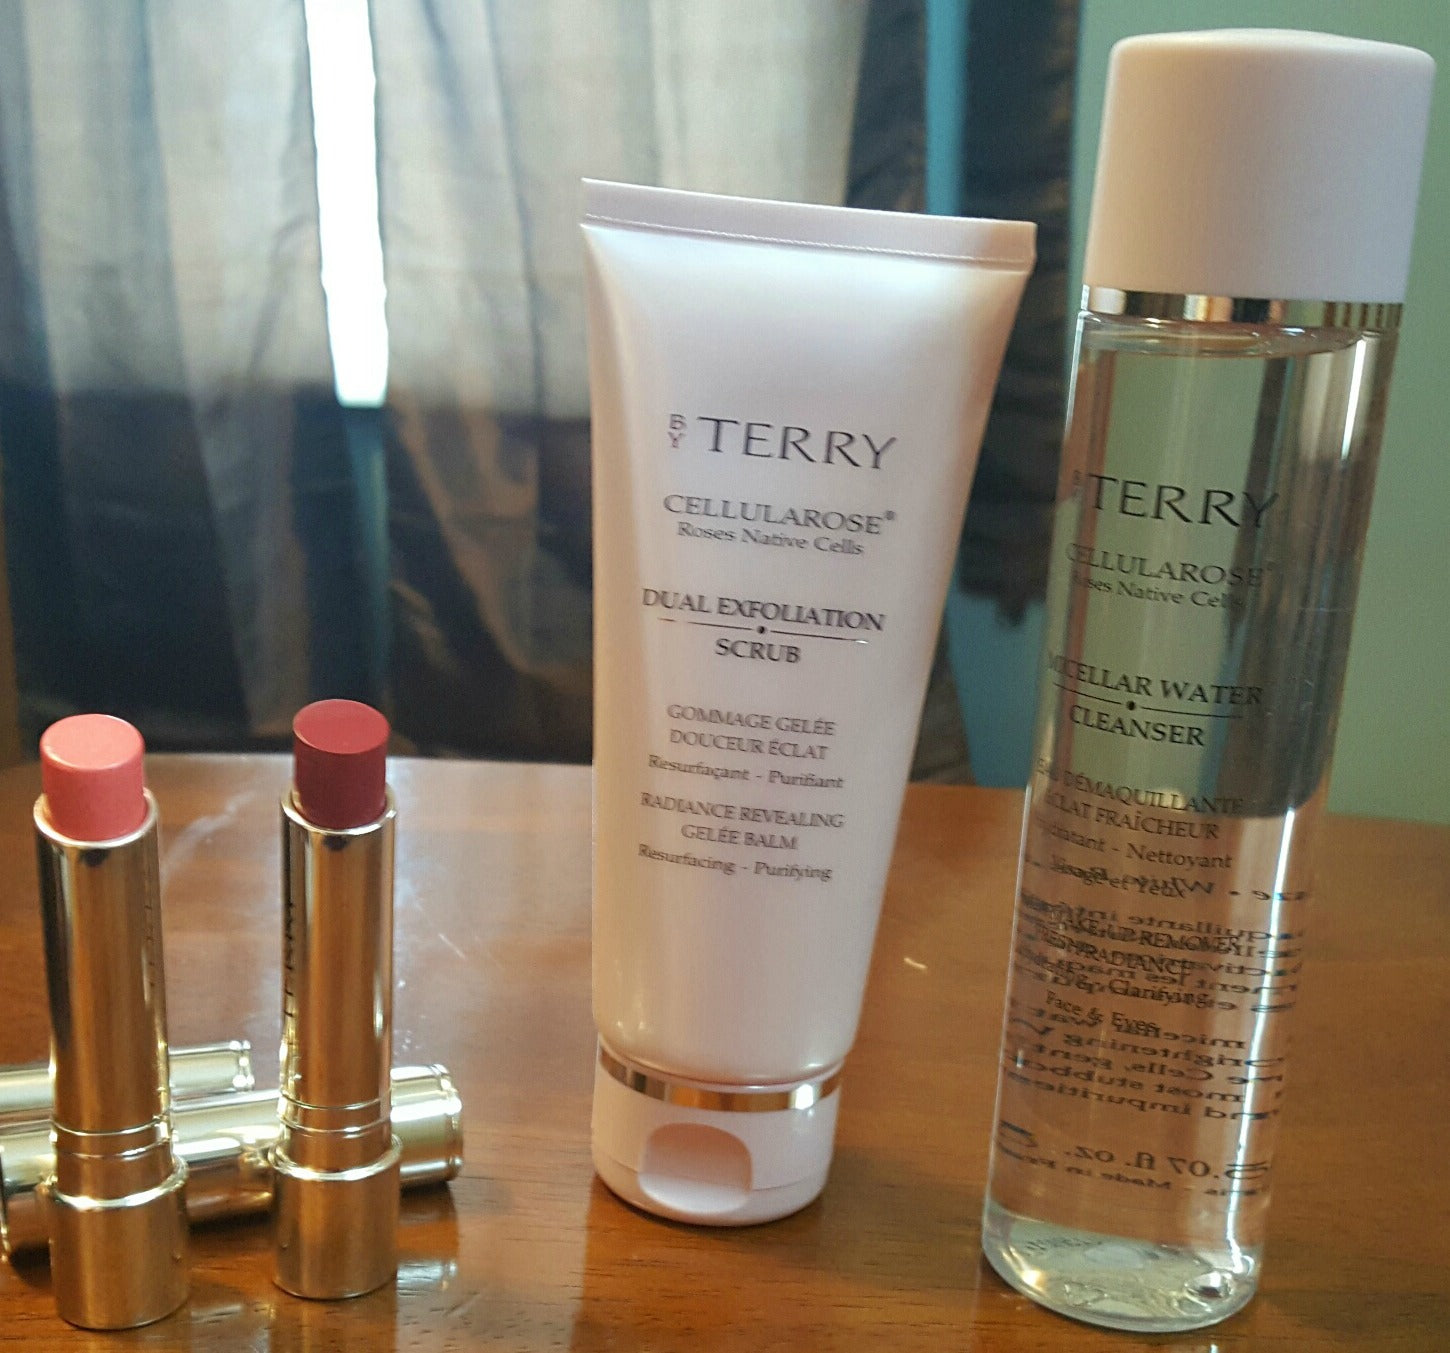 Review, Swatches, By, Terry, Dual, Exfoliation, Scrub, Micellar, Water, Hyaluronic, Sheer, Rouge, Lipsticks, Skincare, Makeup